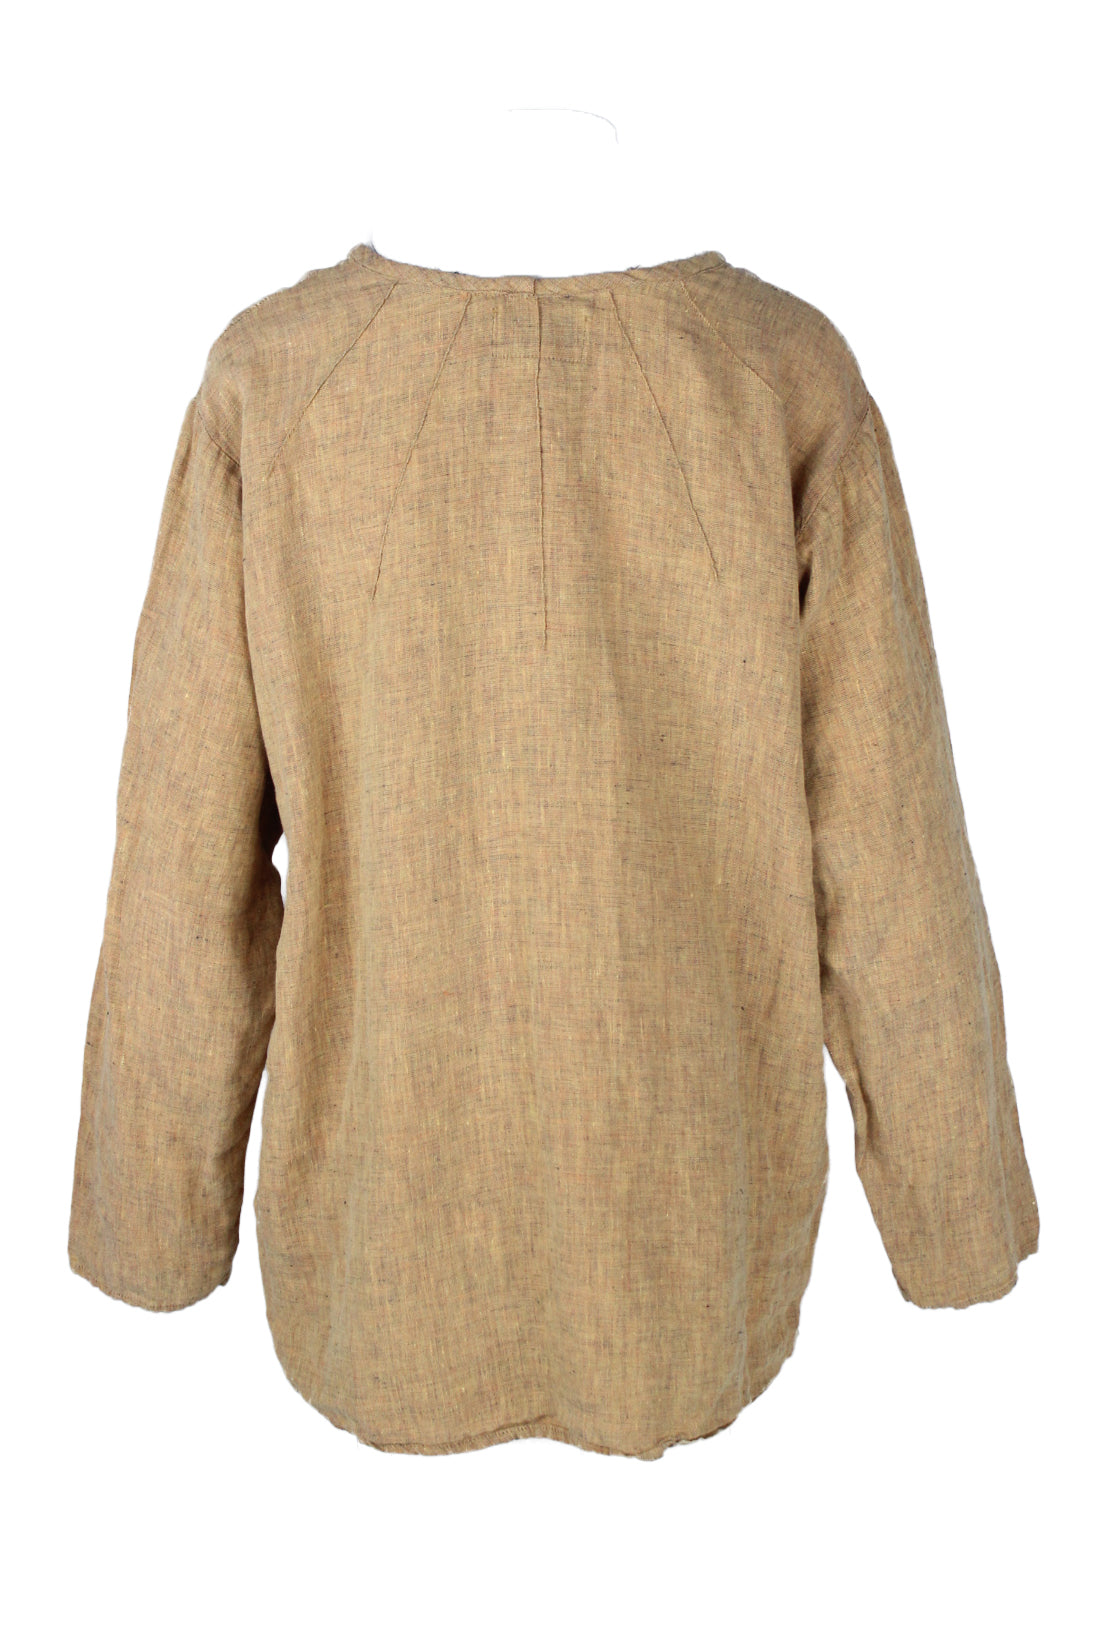 back angle of long sleeve flax blouse. features darts near neckline. 